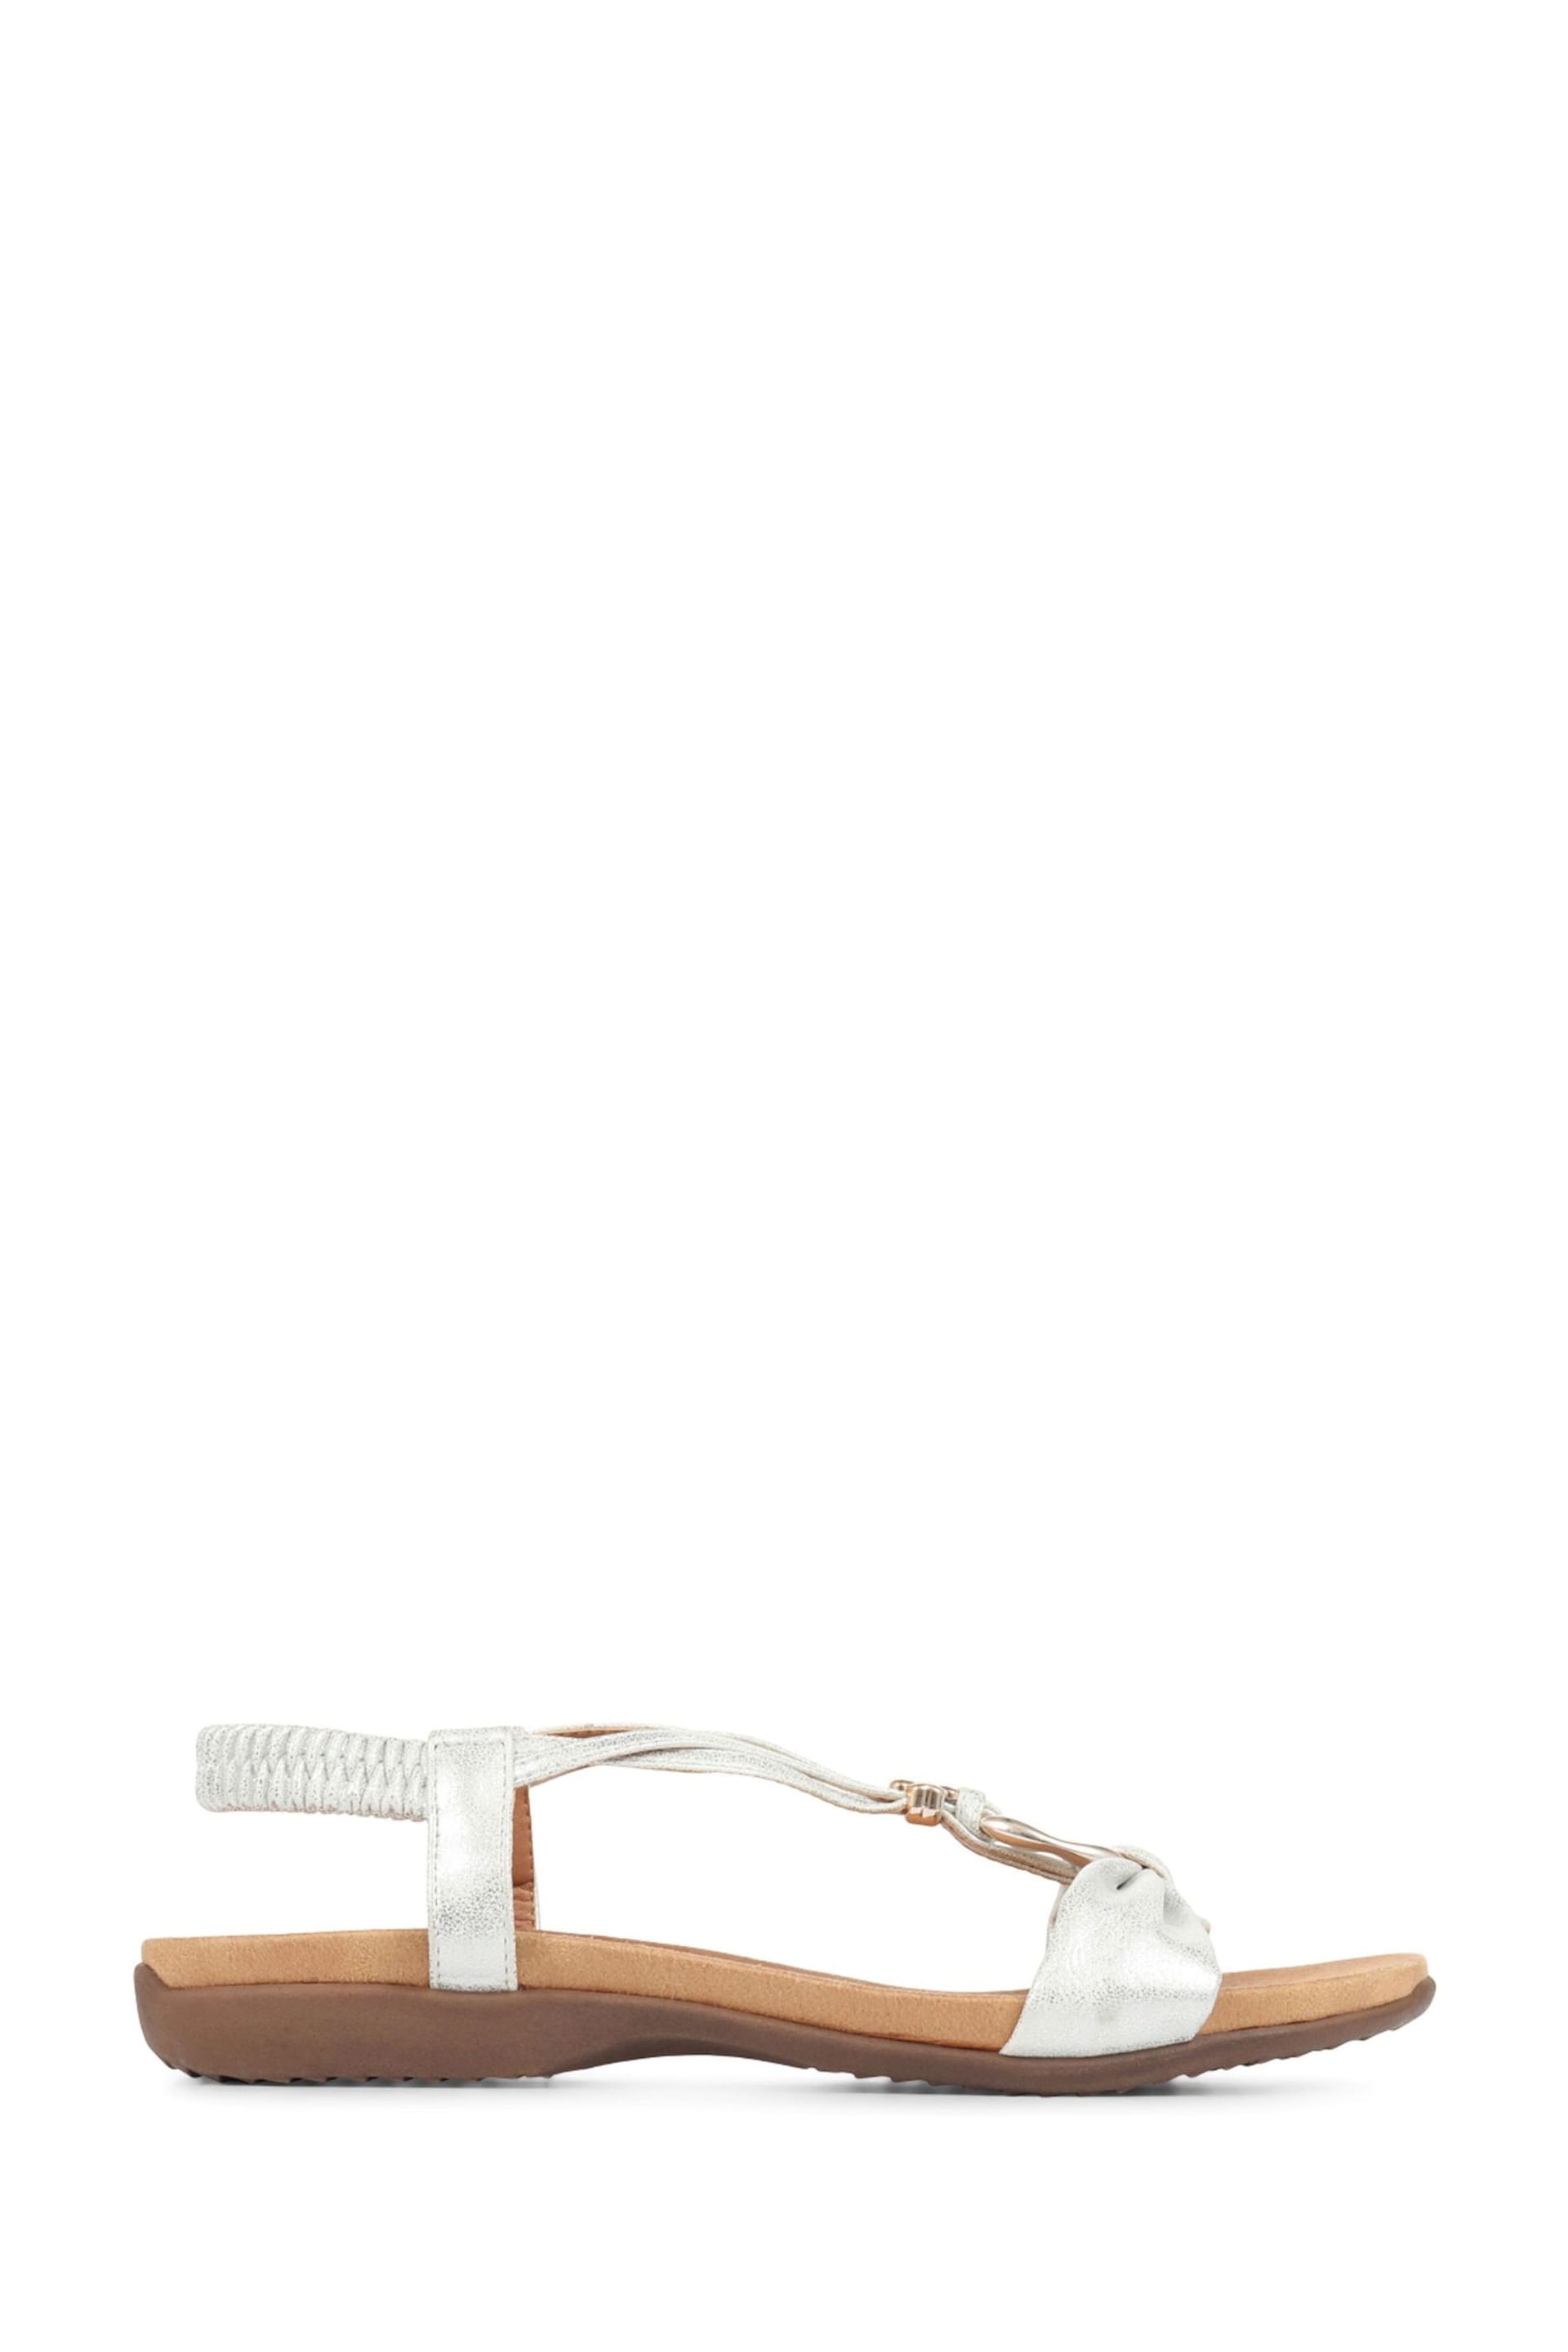 Pavers White Flat-Strappy-Sandal - Image 2 of 6